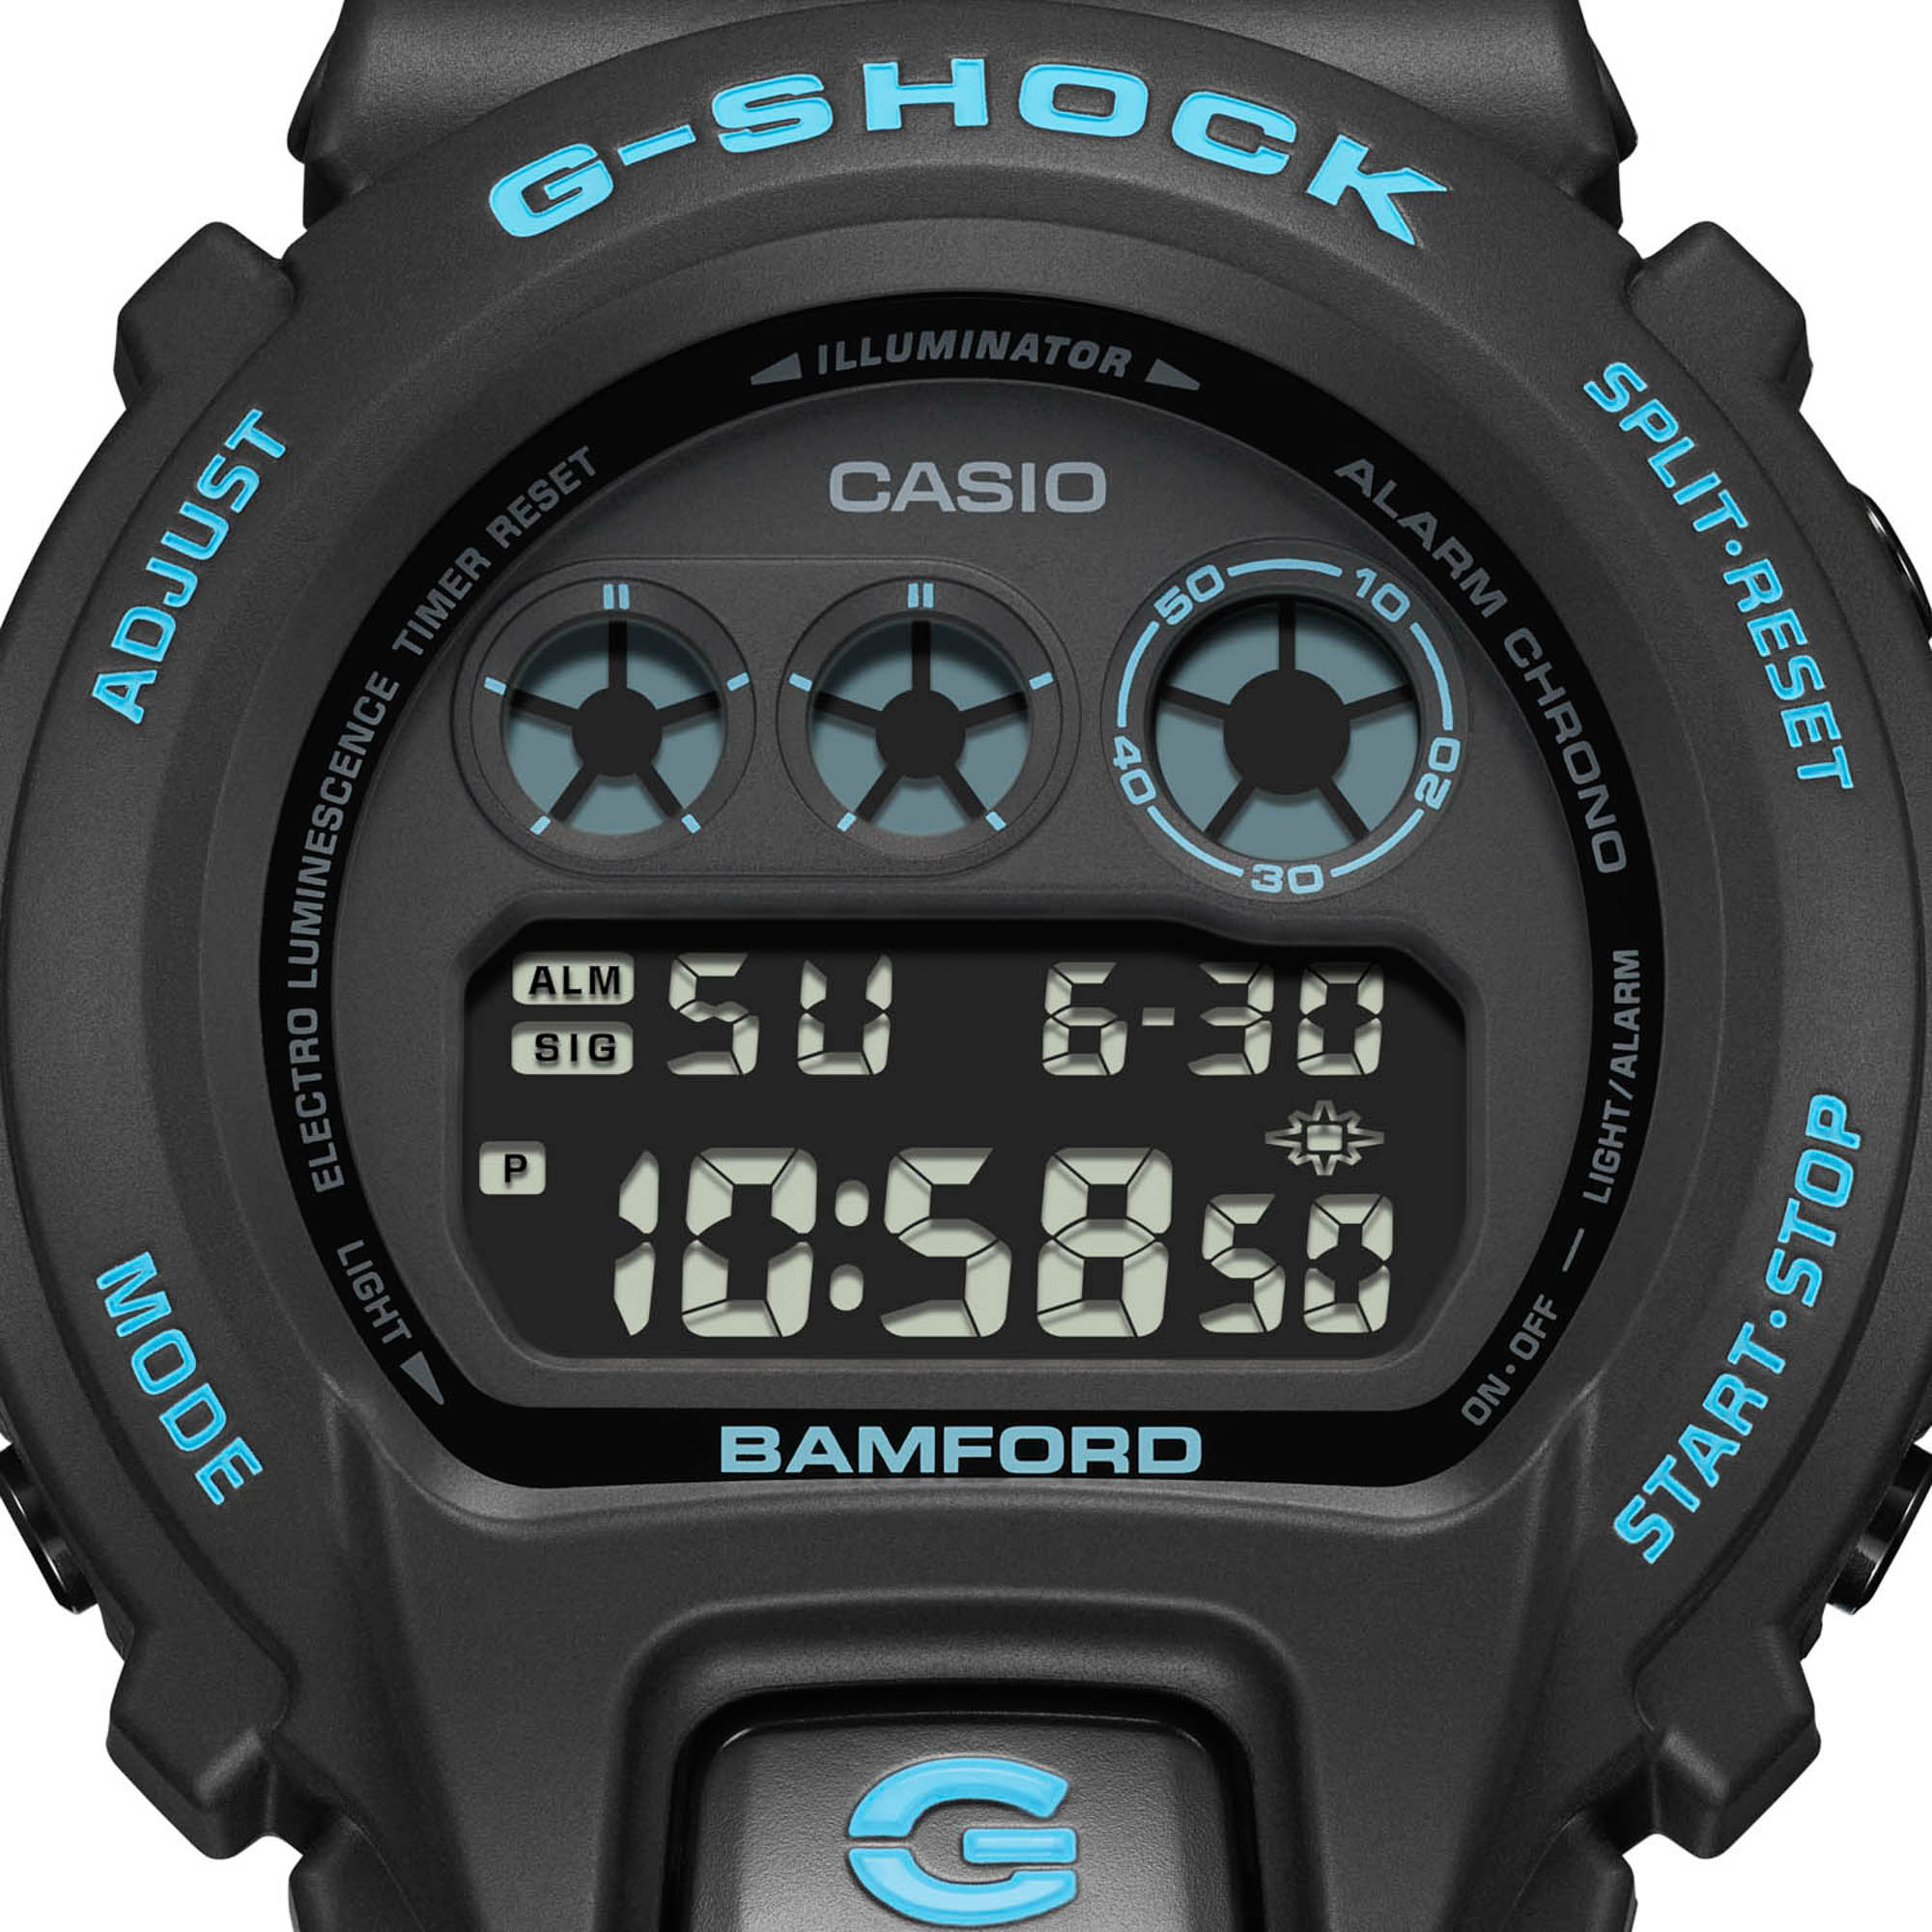 Bamford And G-Shock Unveil The DW-6900BWD-1ER Collaboration Watch